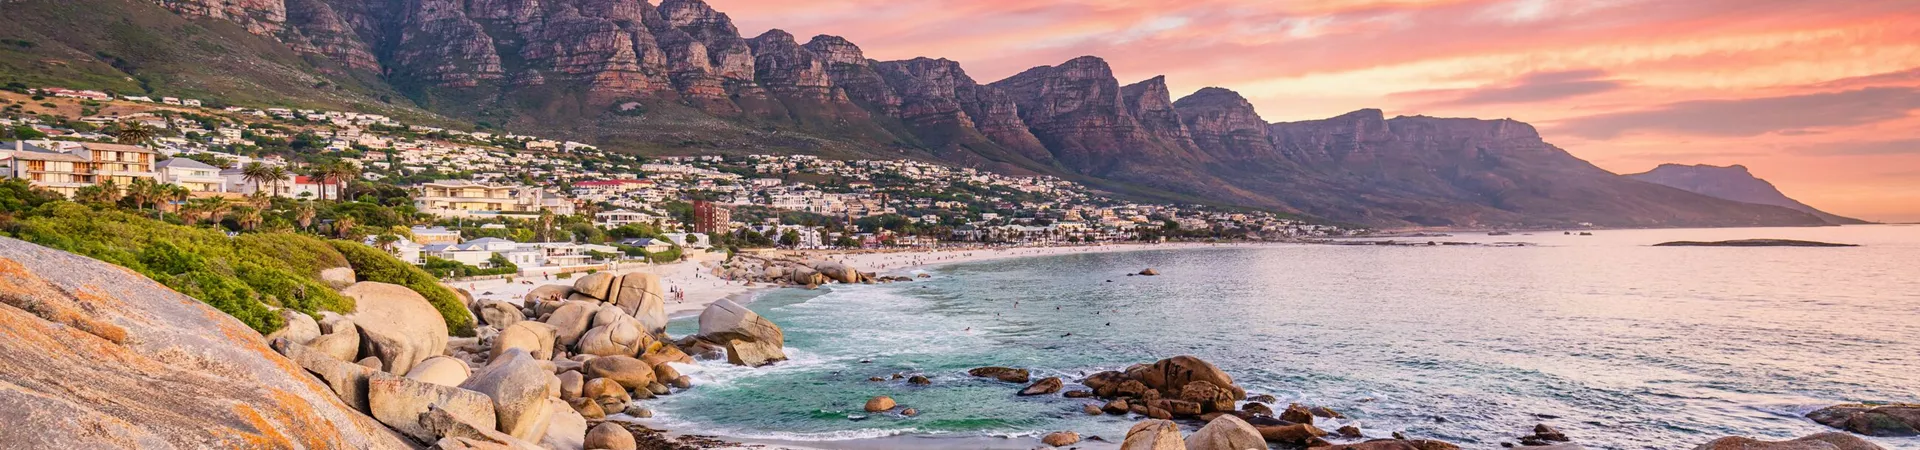 Website Banner Camps Bay Cape Town Vibrant Sunset Twilight South Africa 1202000618